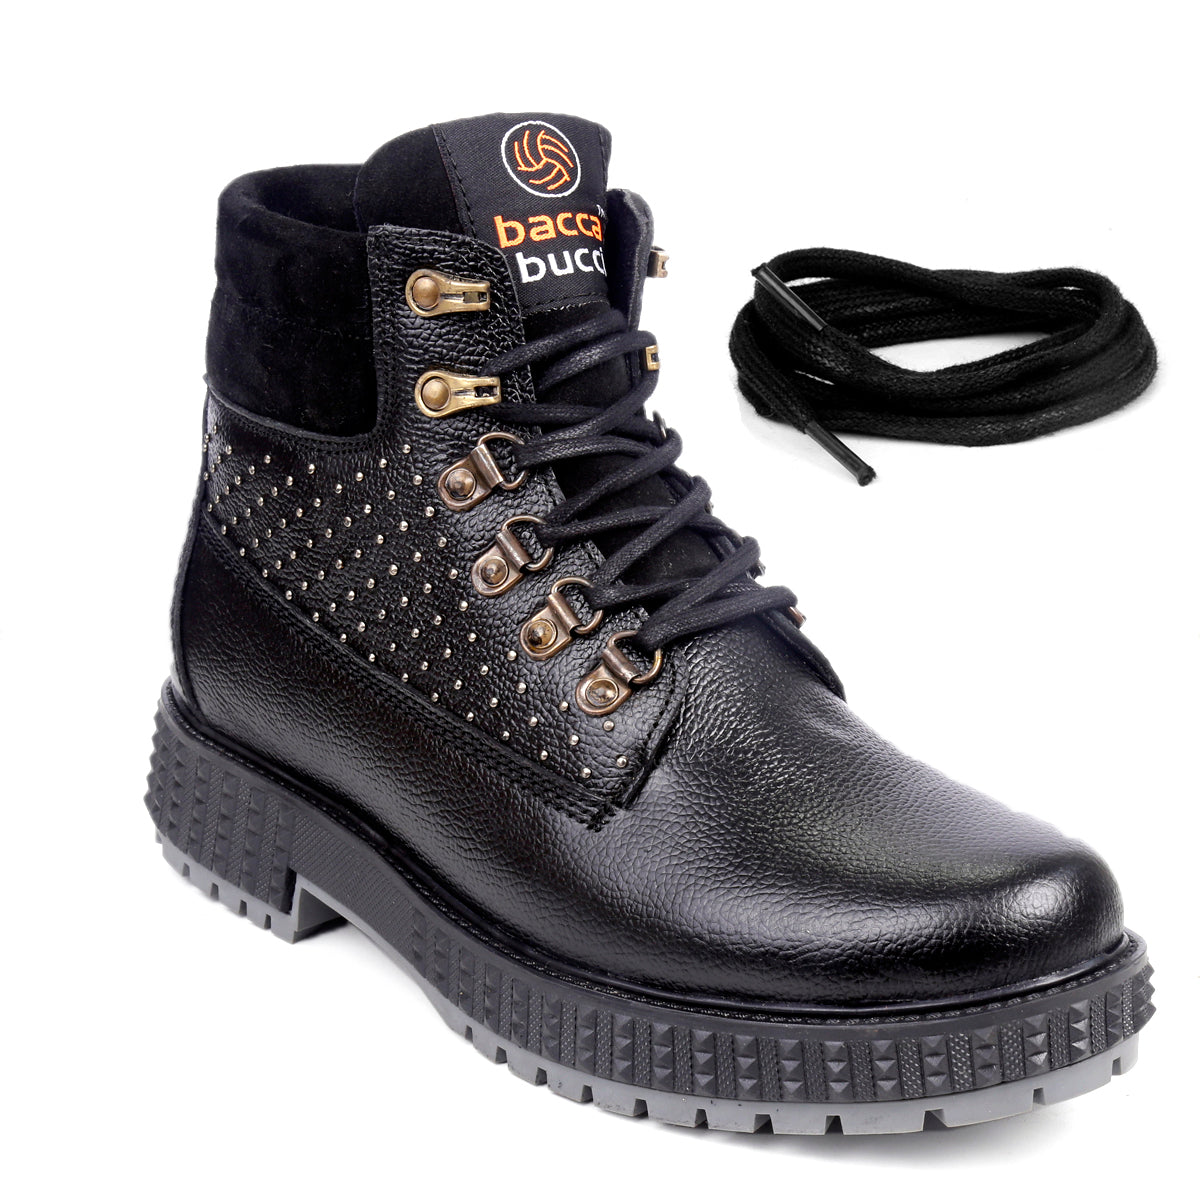 water resistant boots, leather boots for men, leather boots, black leather boots